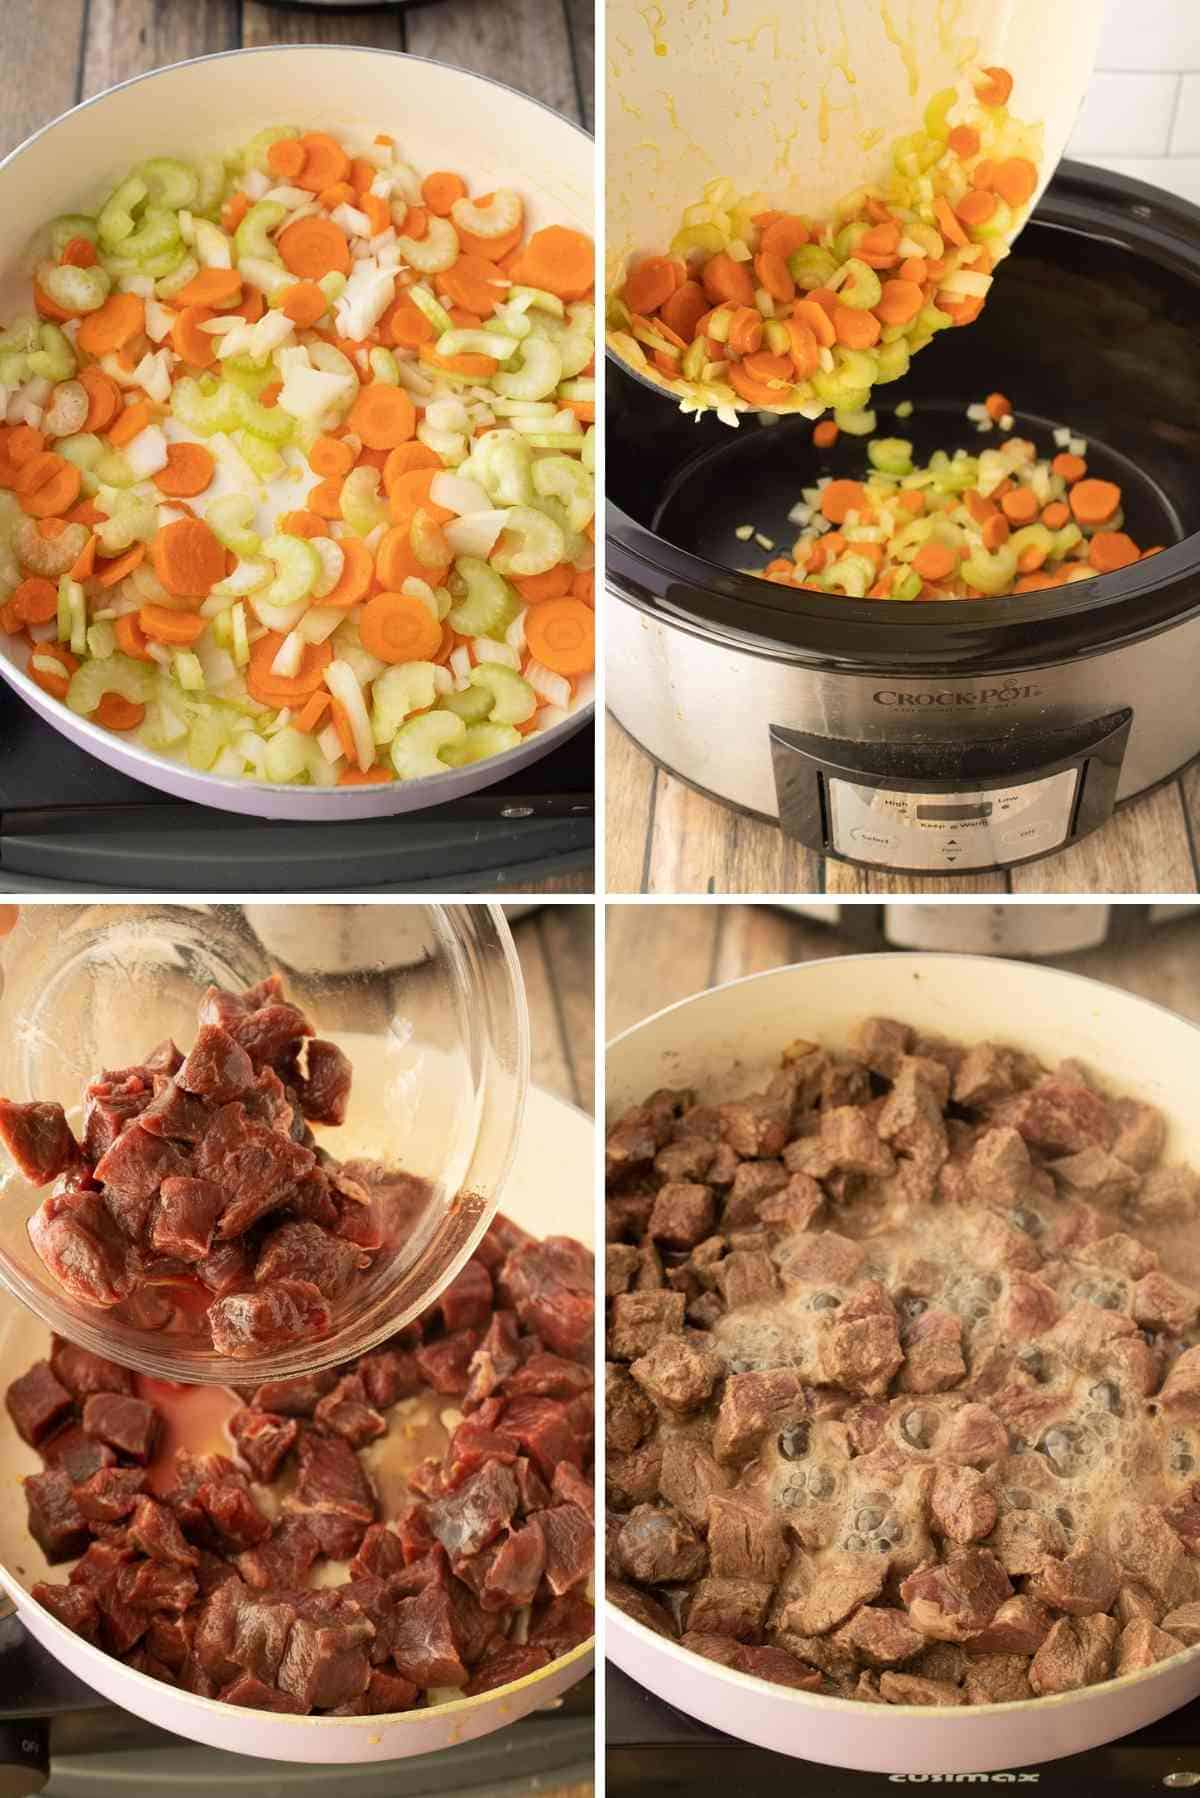 Saute vegetables, add to slow cooker, brown meat.